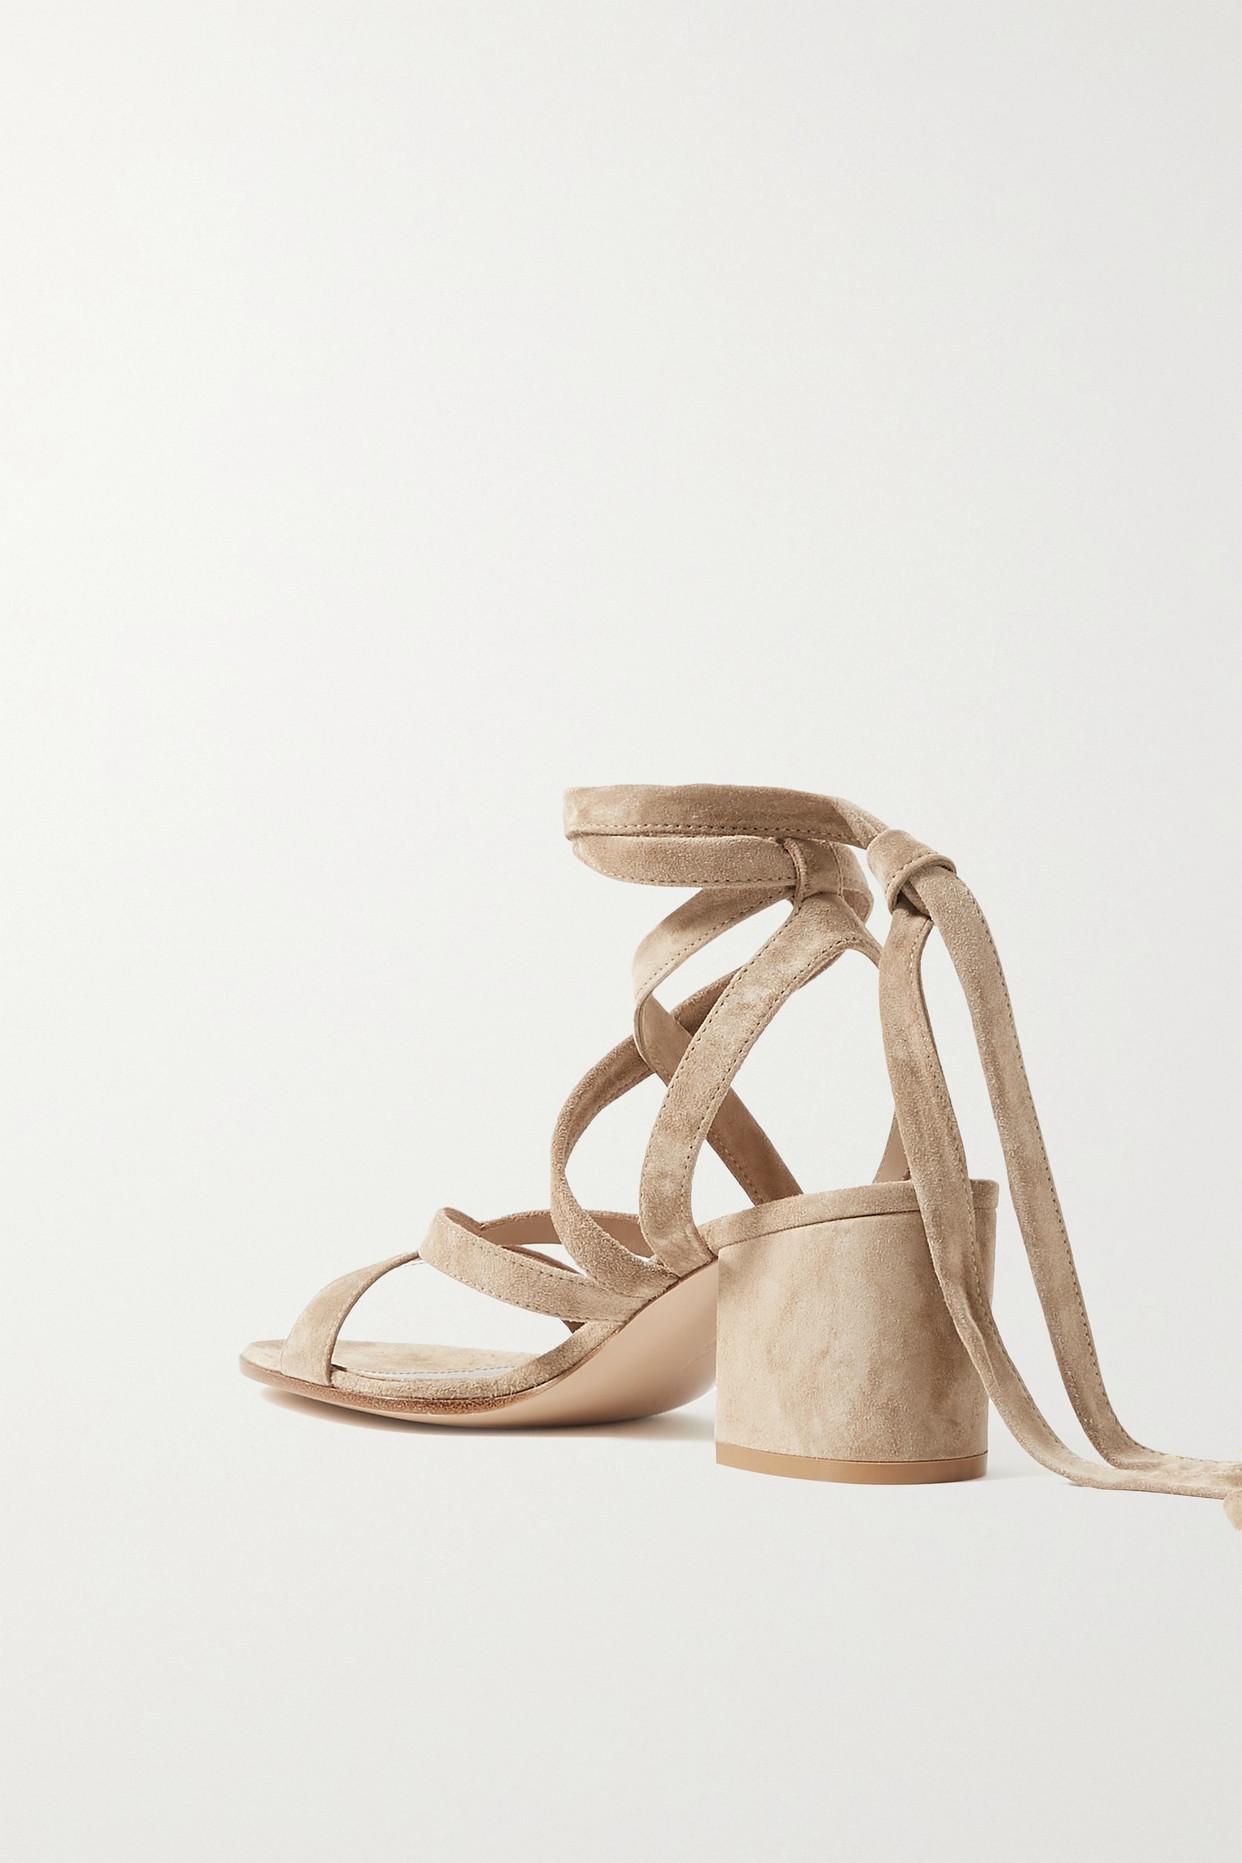 Gianvito Rossi Janis 60 Suede Sandals in Natural | Lyst